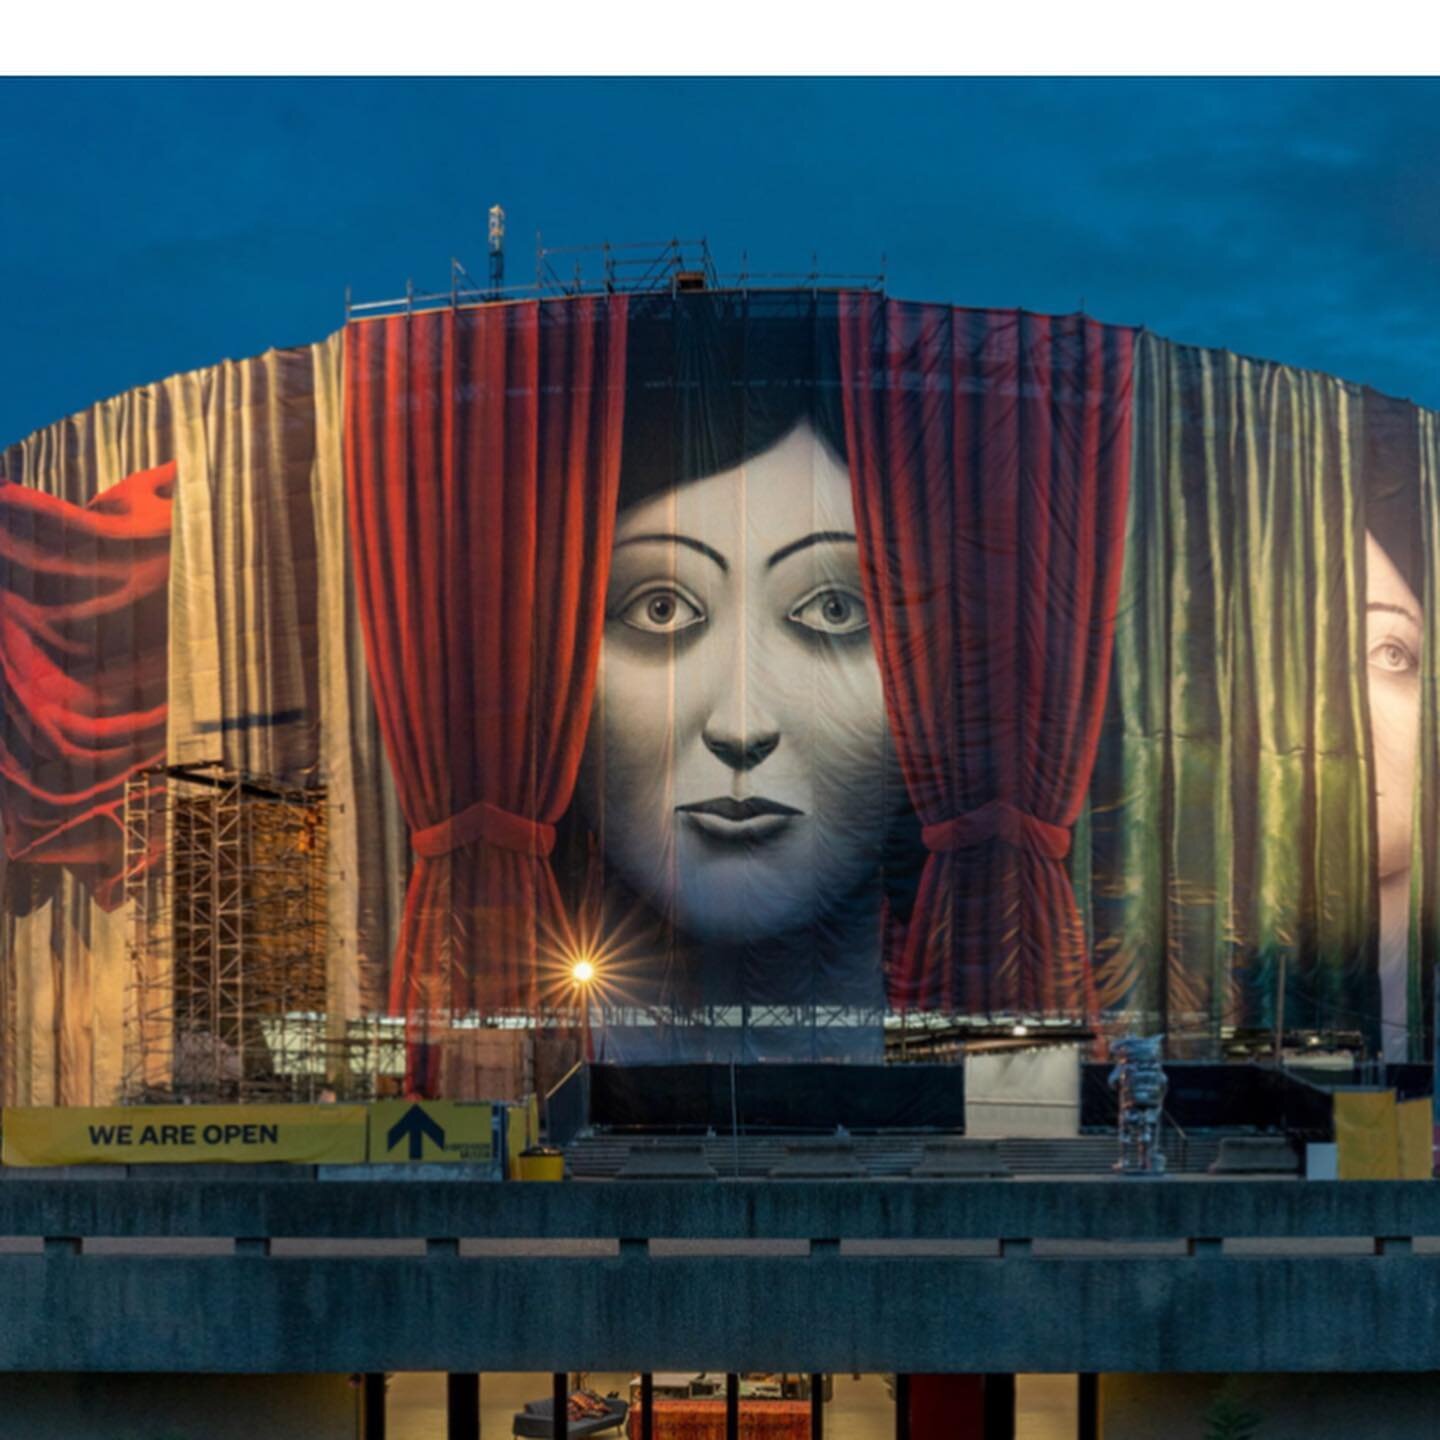 Nicolas Party shares his process and inspiration for his @hirshhorn commission &lsquo;Draw The Curtain&rsquo; his largest work yet. Lots of art historical references in the curtains, think Dutch 17th c paintings&hellip; @nicolasparty #publicart #hirs